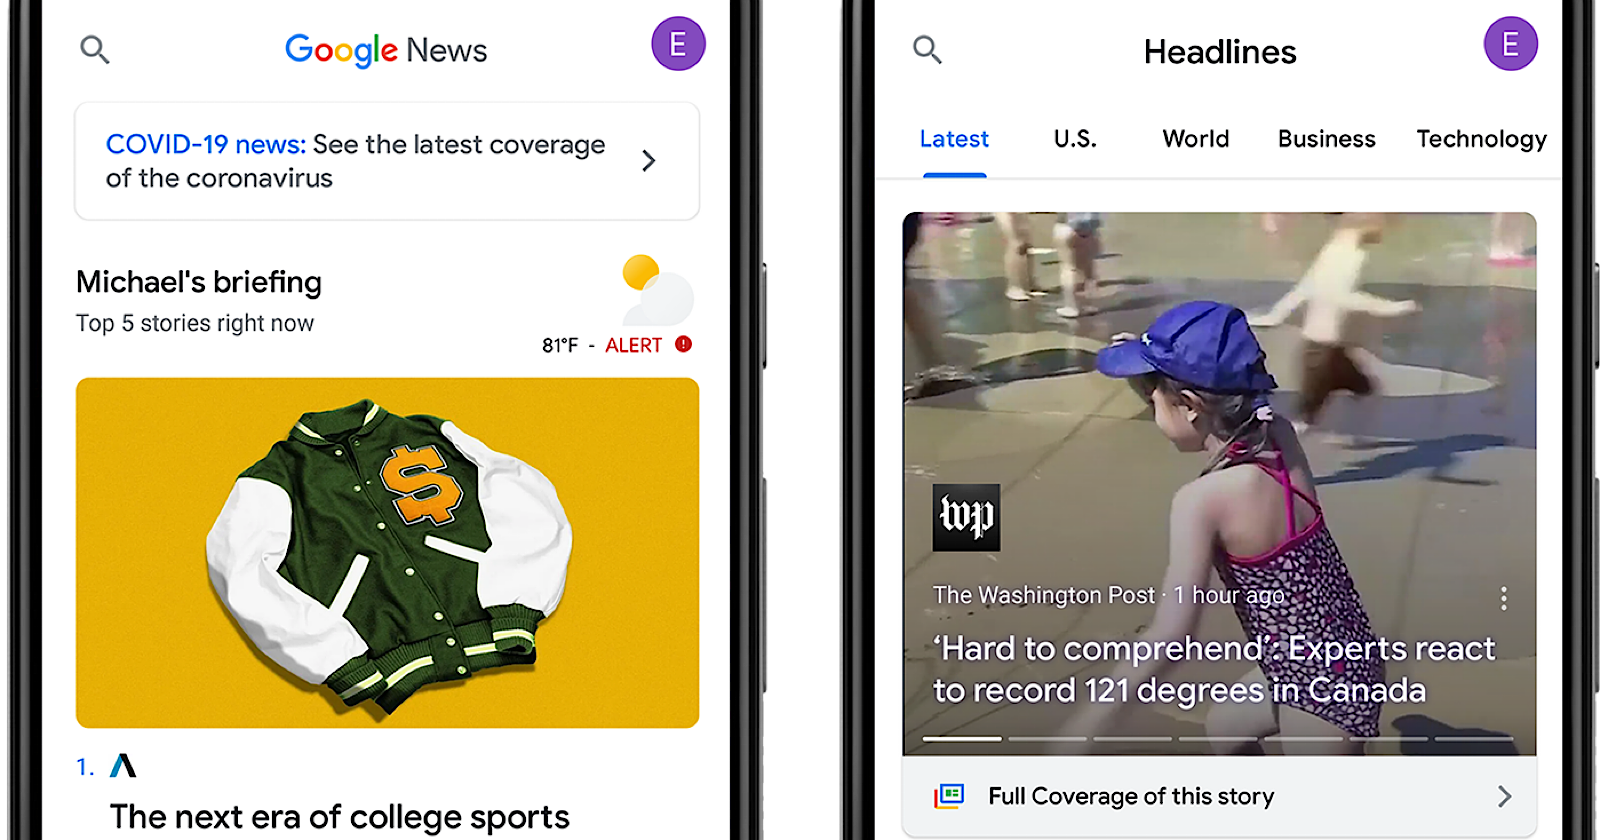 google shares 5 insights into appearing in google news via sejournal mattgsouthern